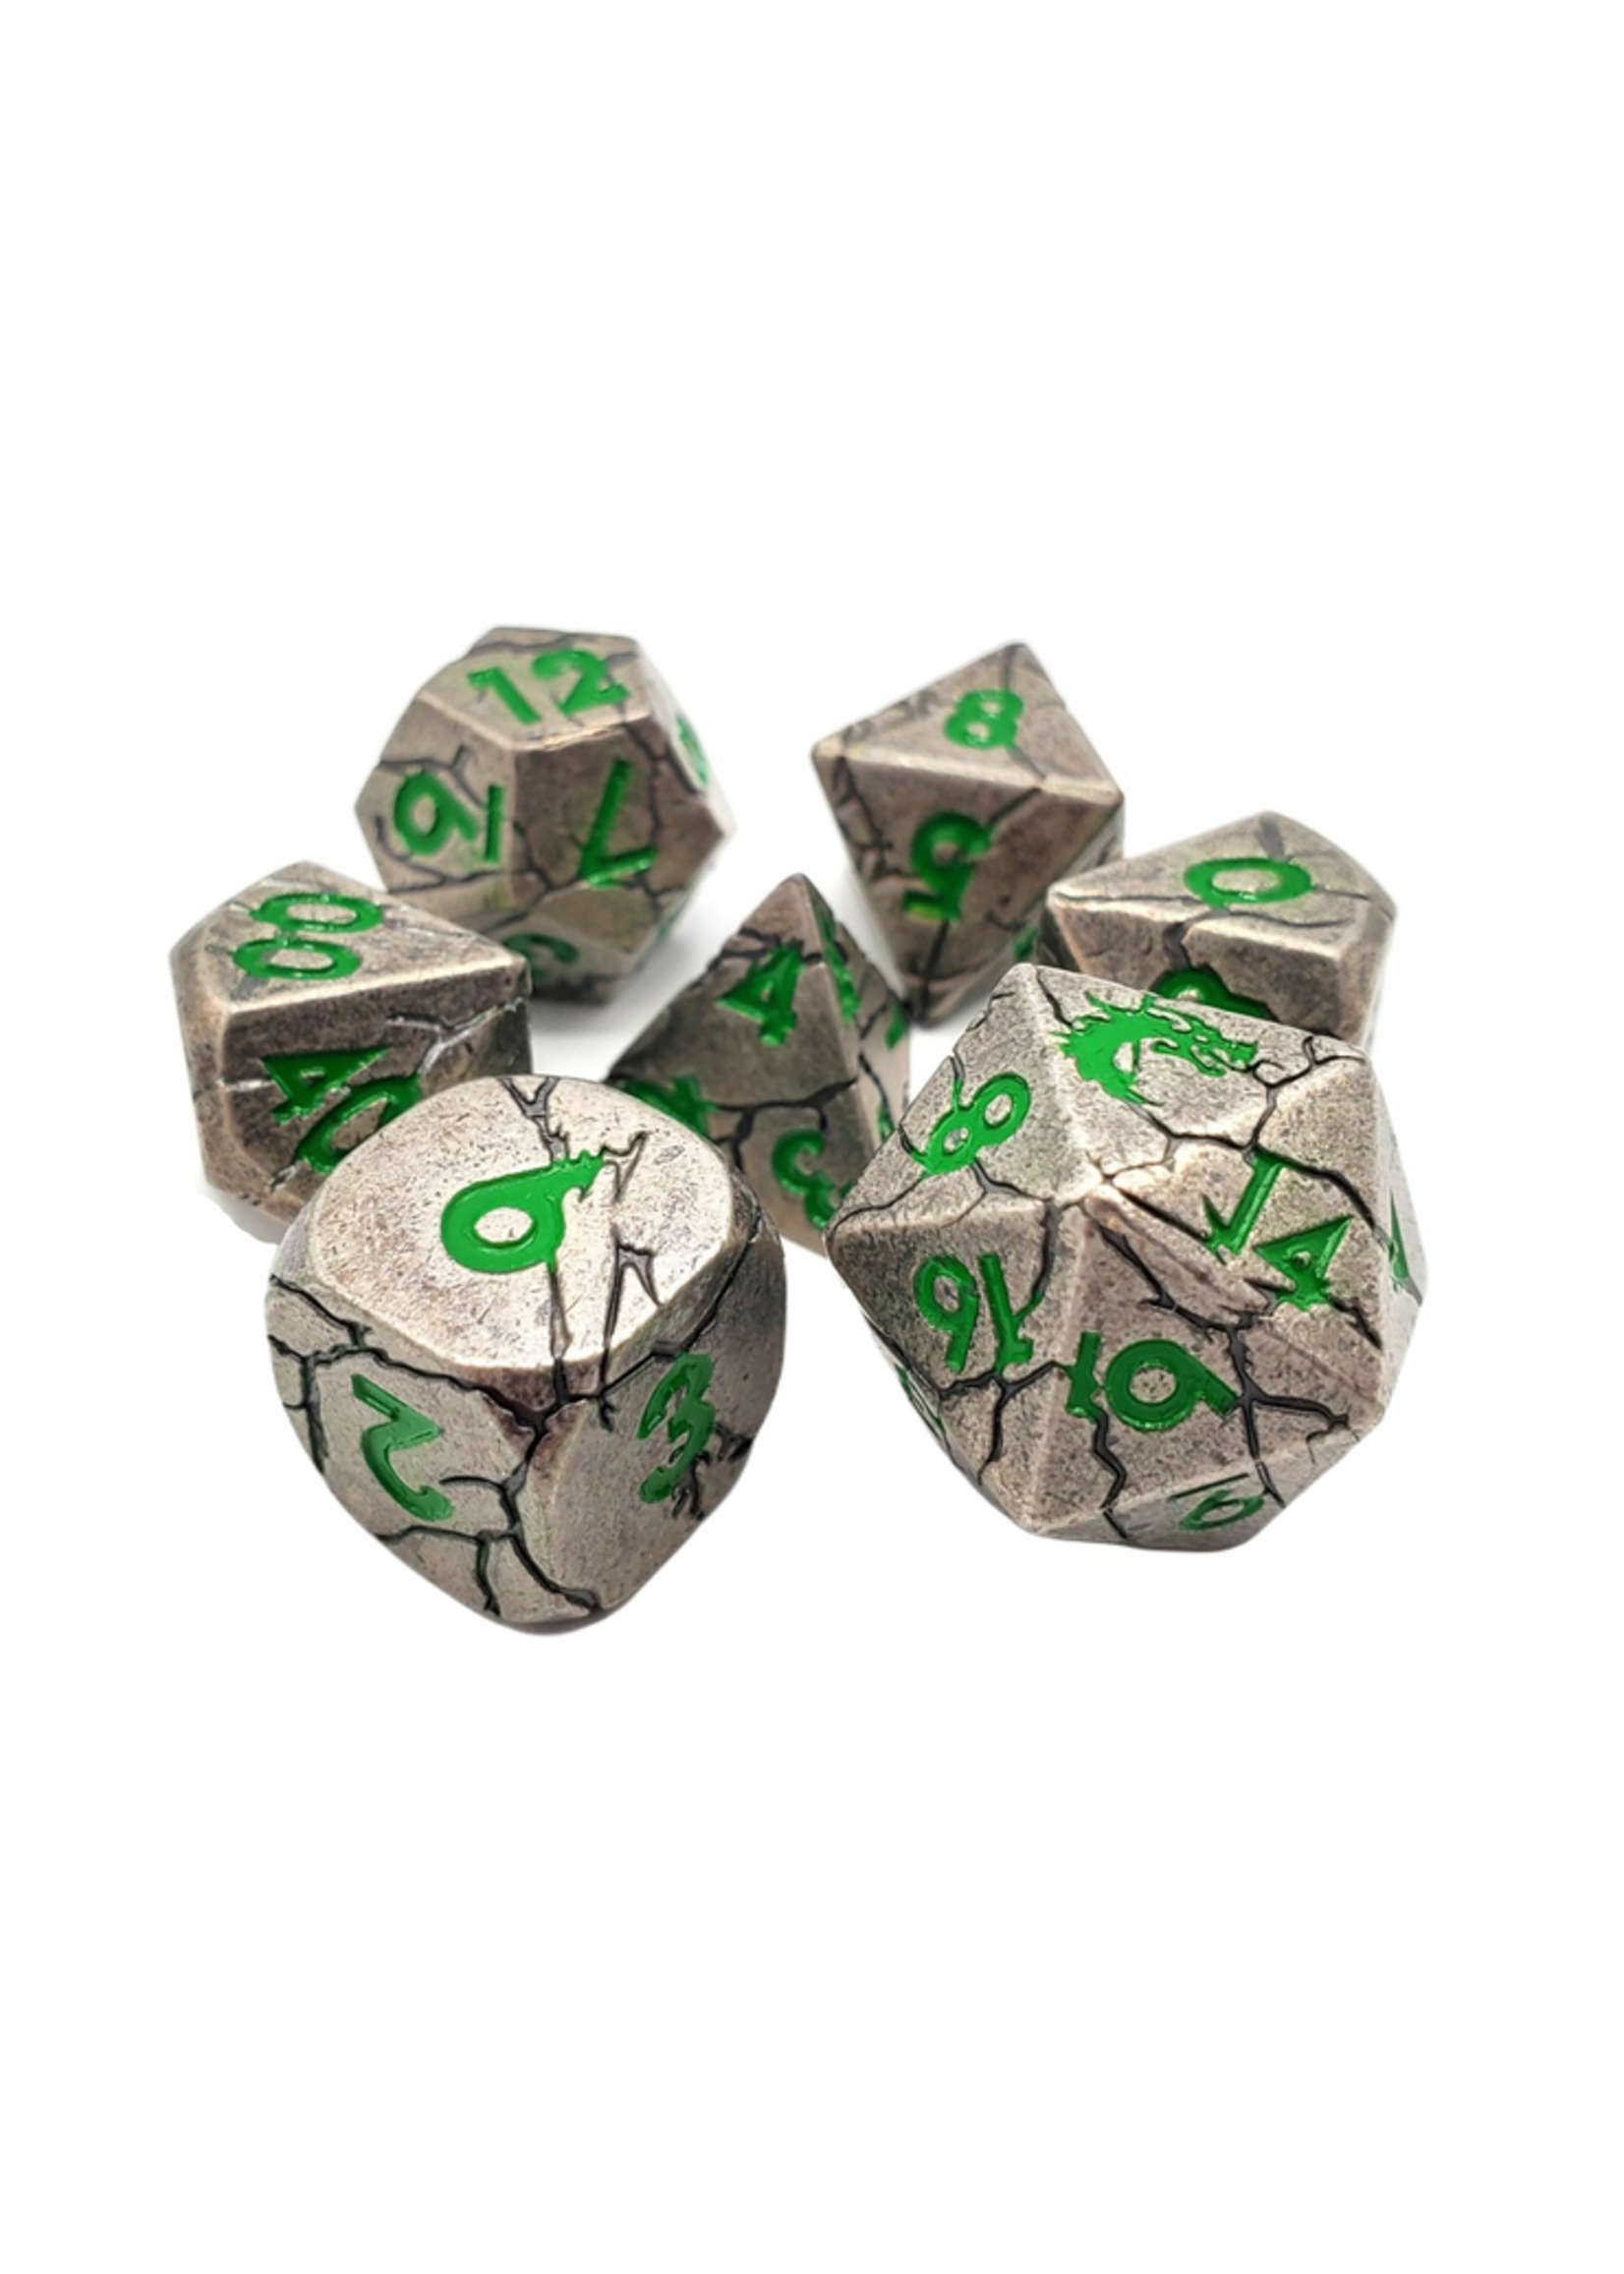 Old School Dice Old School 7 Piece RPG Metal Dice Set: Orc Forged -Ancient Silver w/ Green